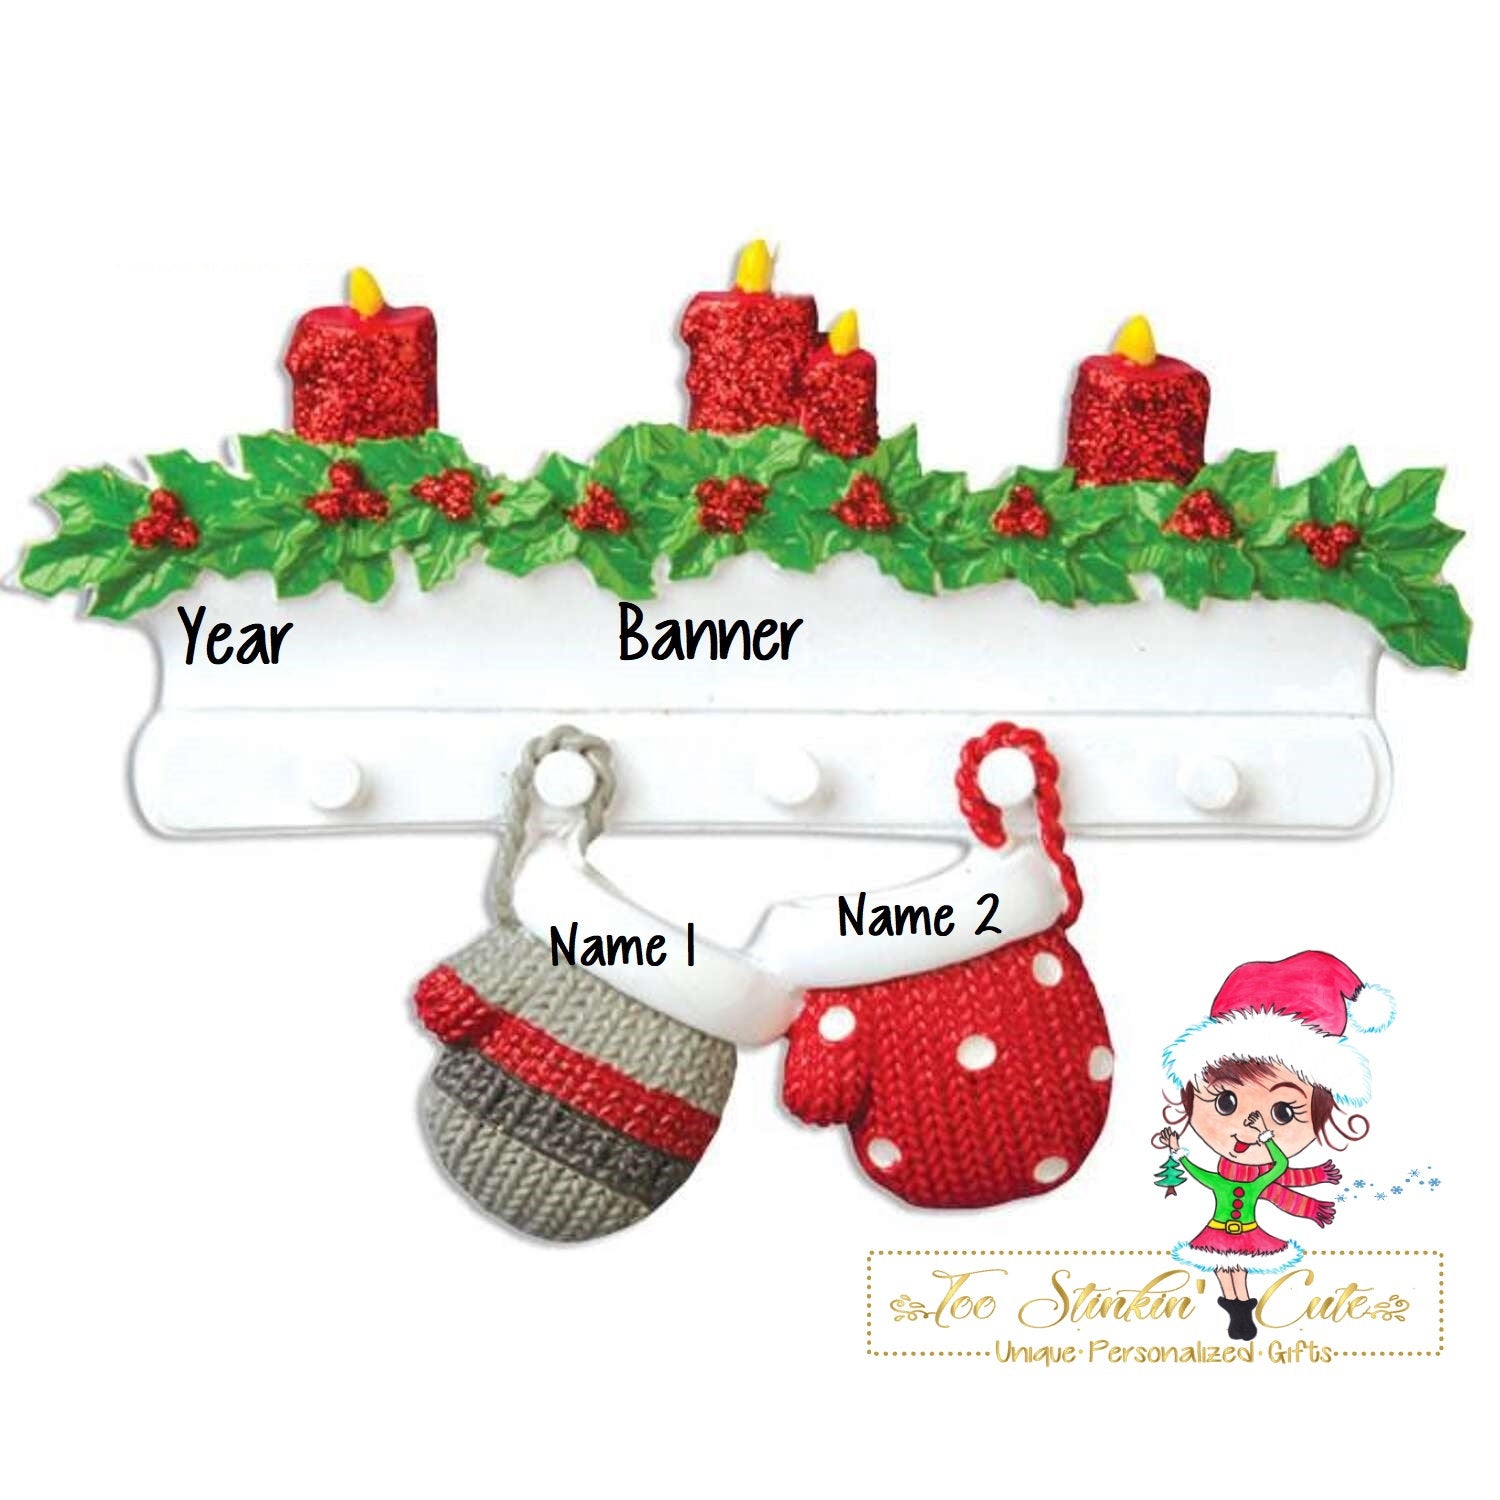 Personalized Christmas Ornament Stockings Mitten Family of 2/ Couple/ Newlywed/ Best Friends + Free Shipping!